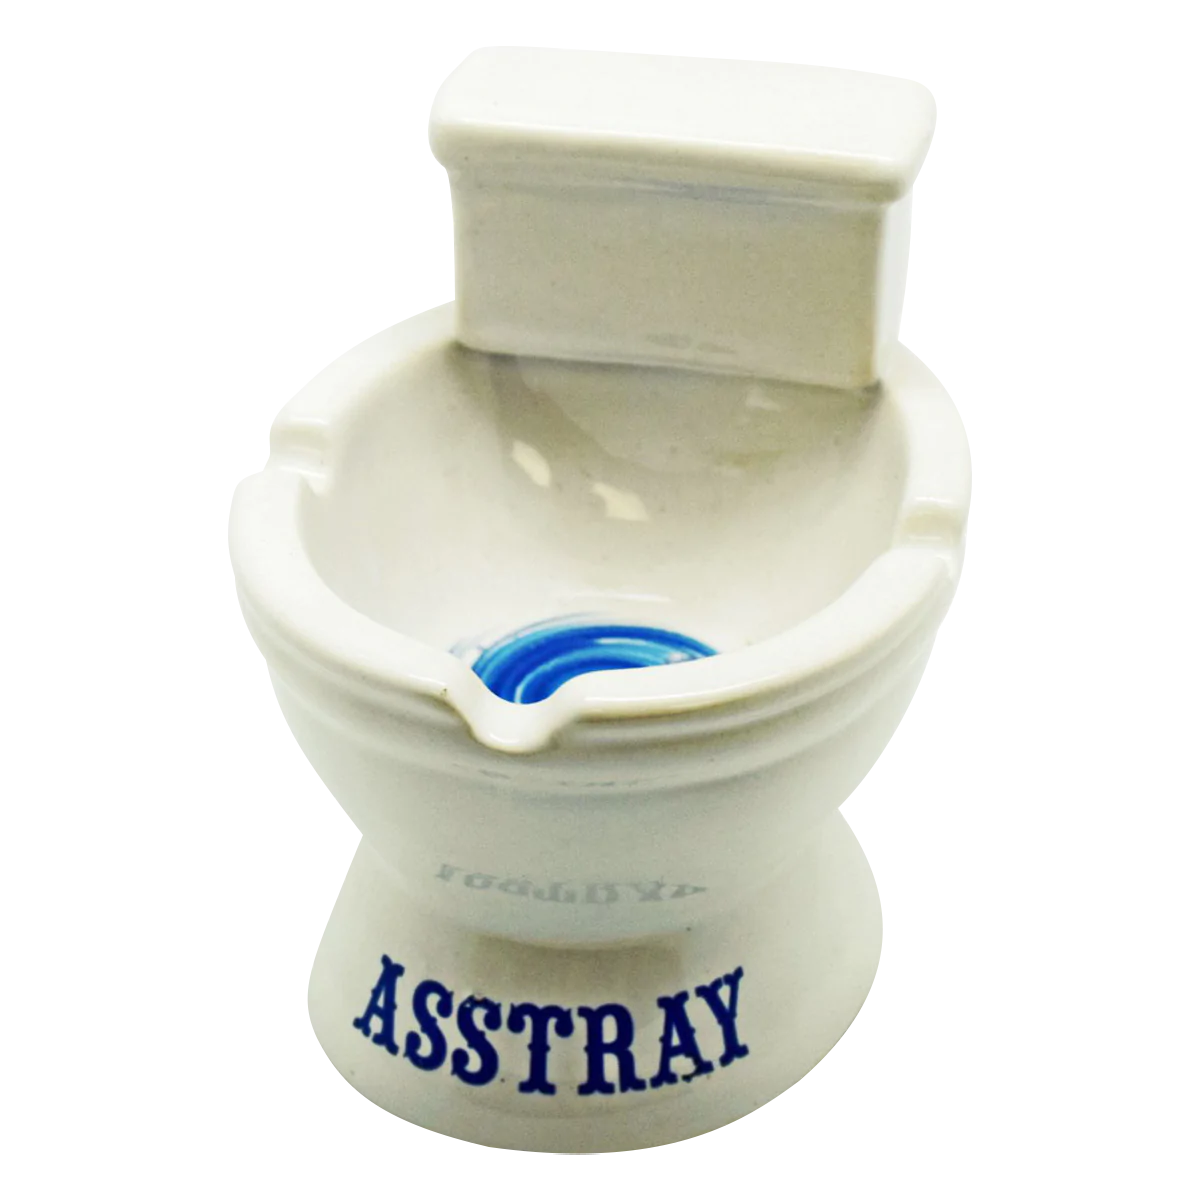 White Ceramic Toilet-Shaped "Asstray" Ashtray Front View on Seamless Background